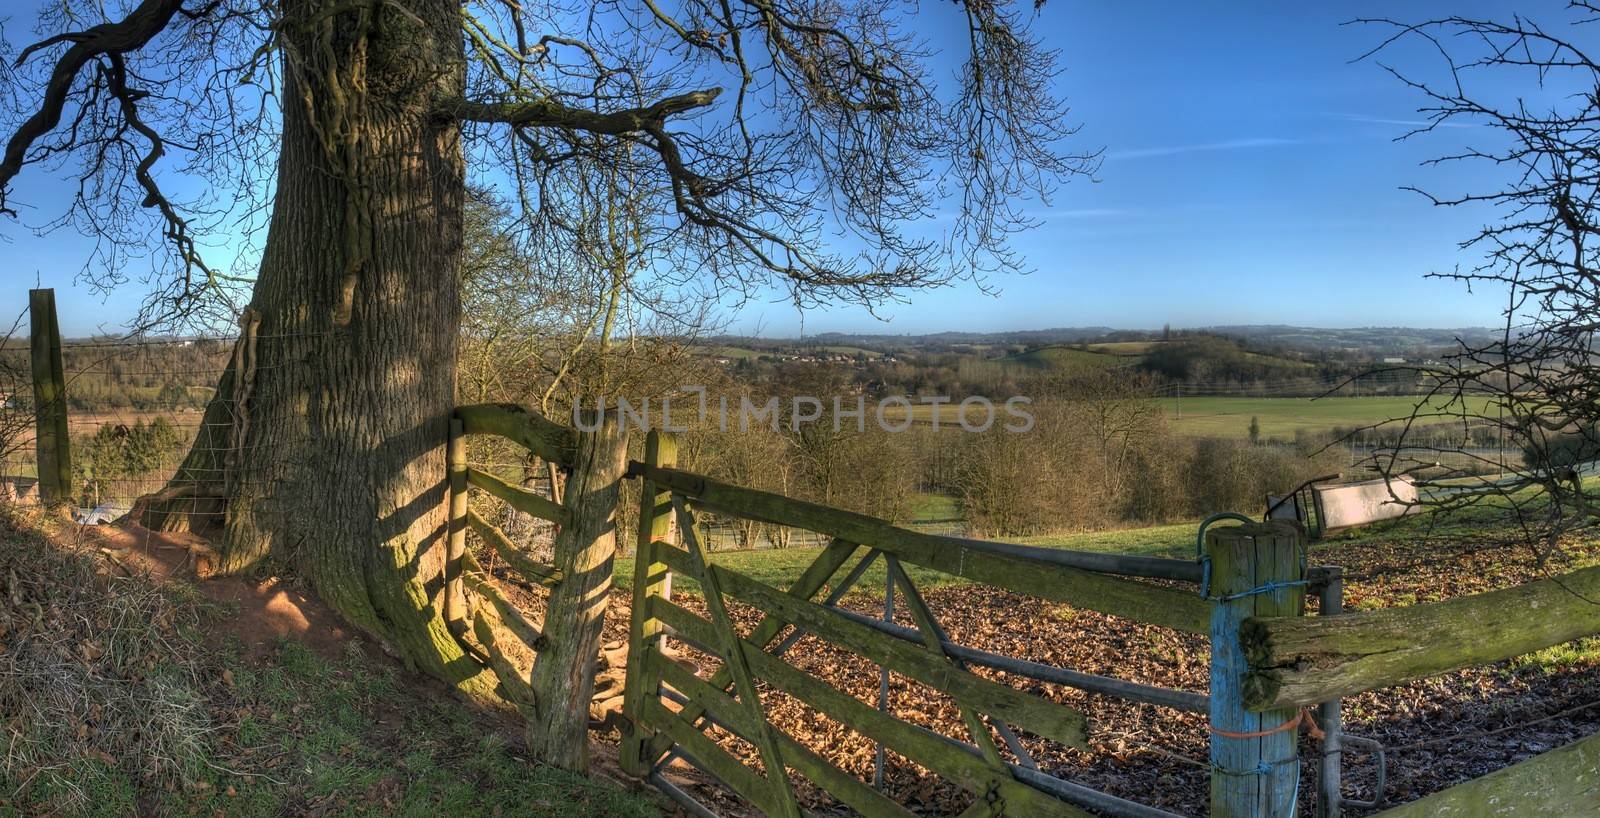 Rural Worcestershire in winter by andrewroland